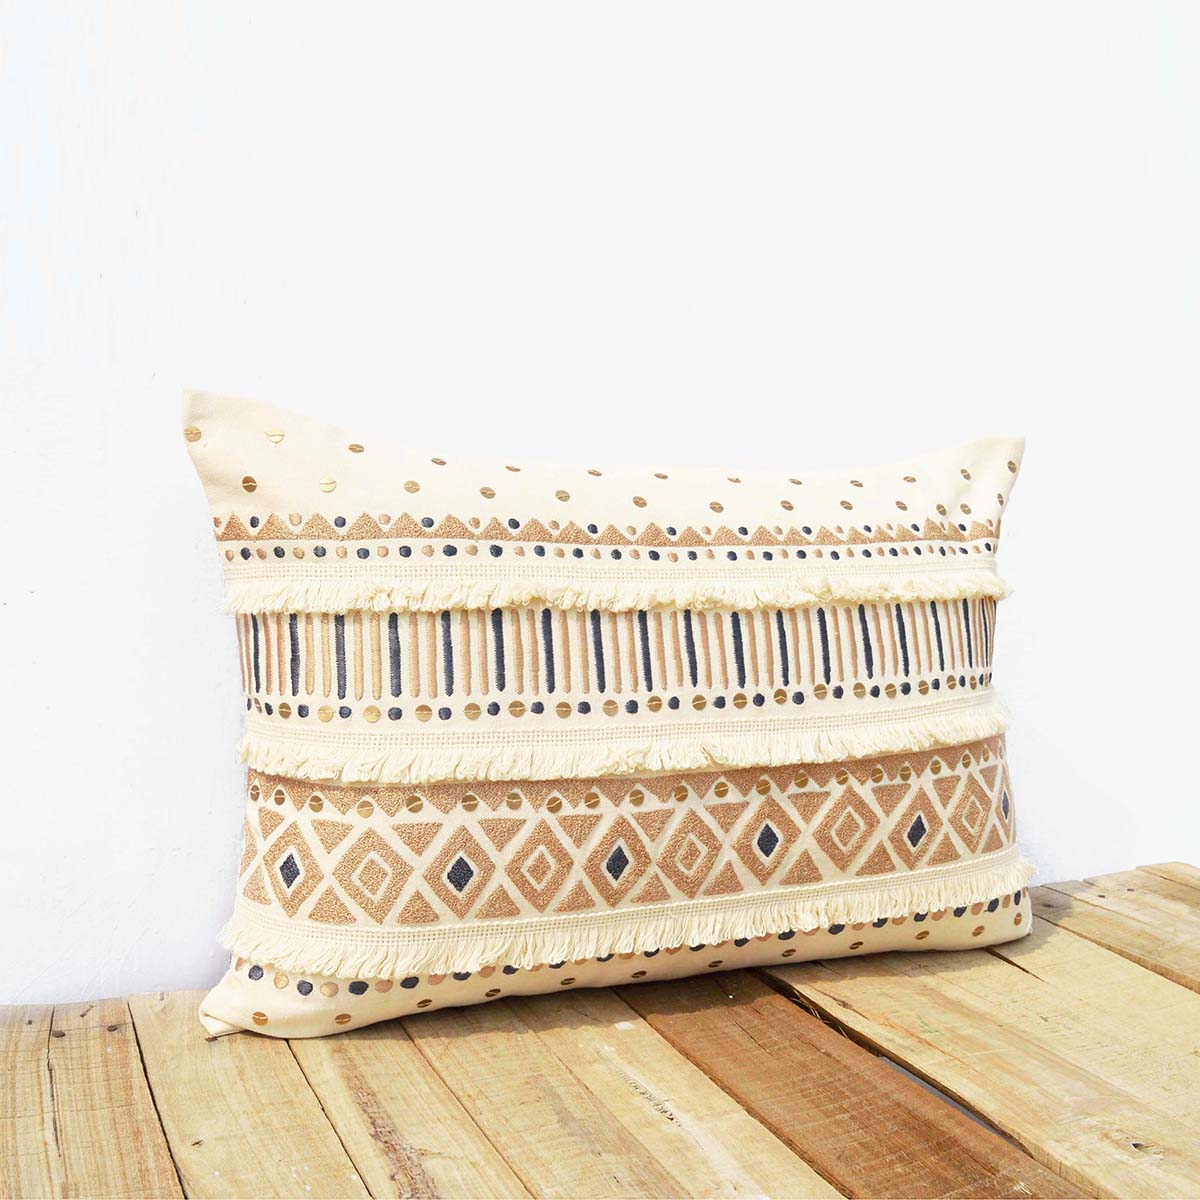 Handira - Cream cotton embroidered cushion cover, sizes available